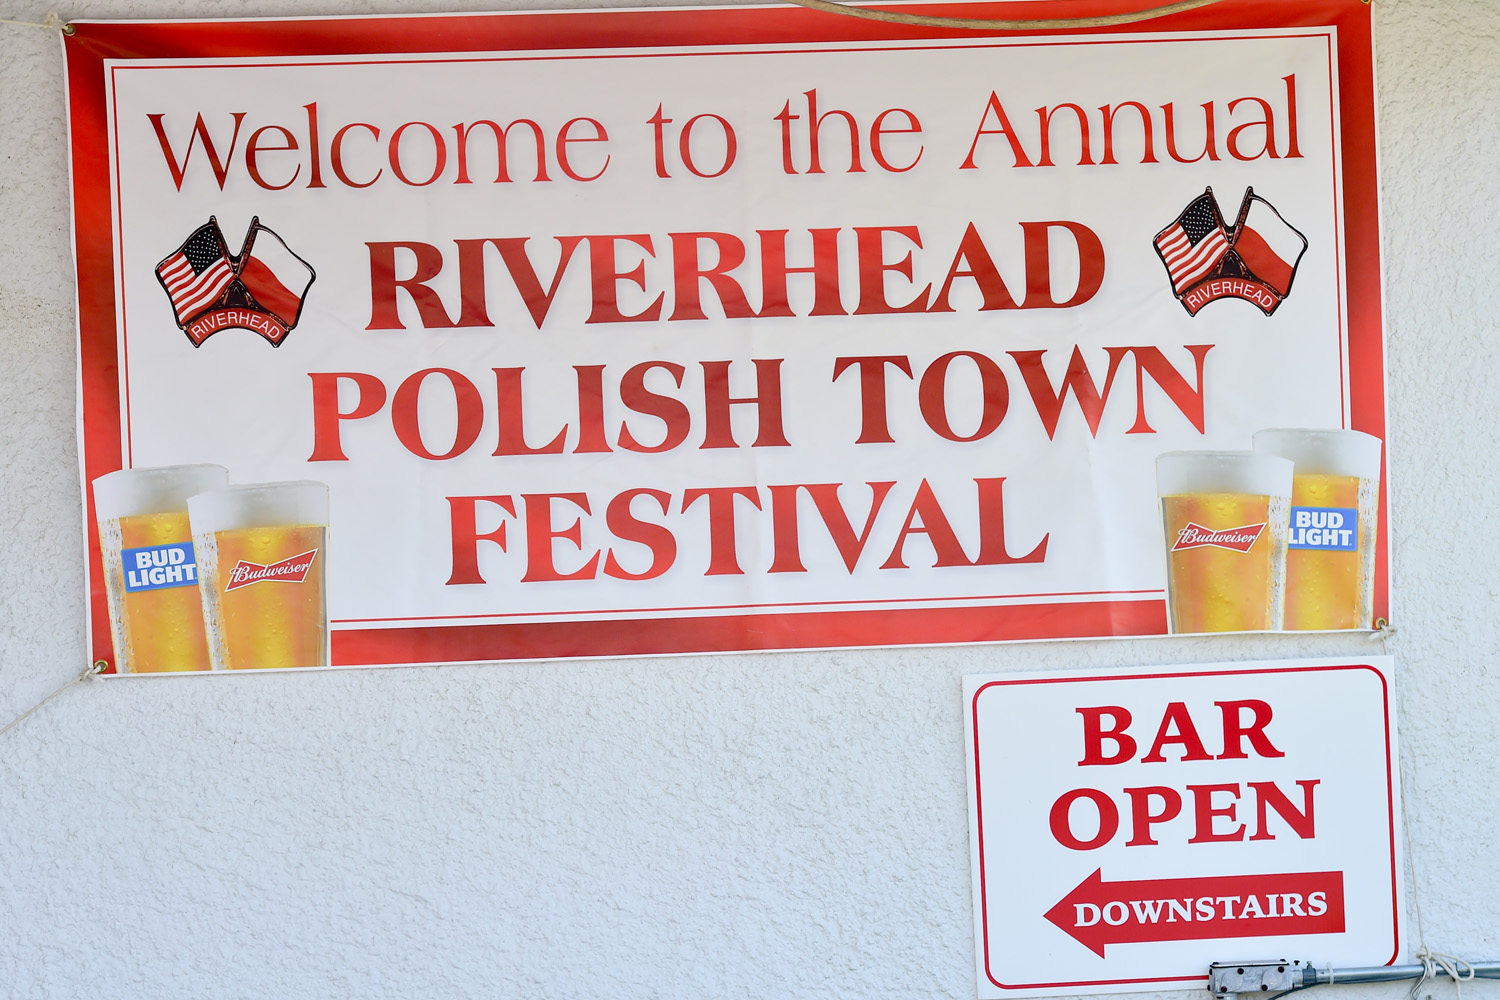 Polish Festival features food, music, historic characters and more at